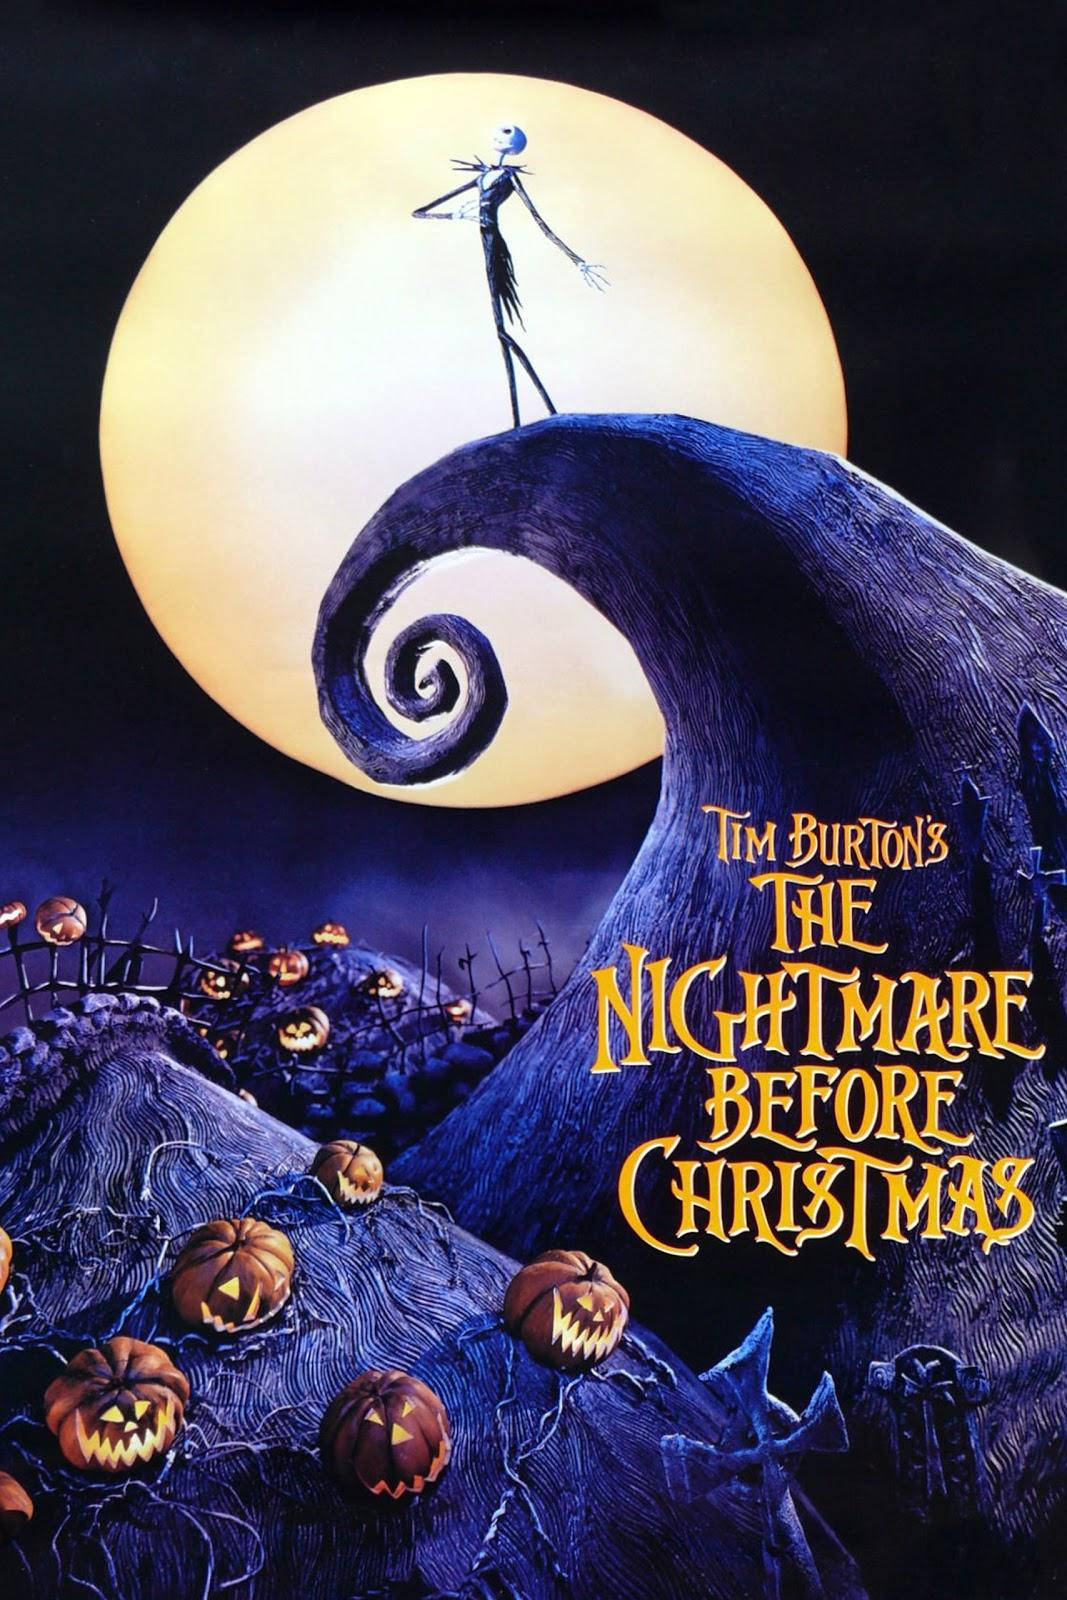 Vintage The Nightmare Before Christmas Poster Background